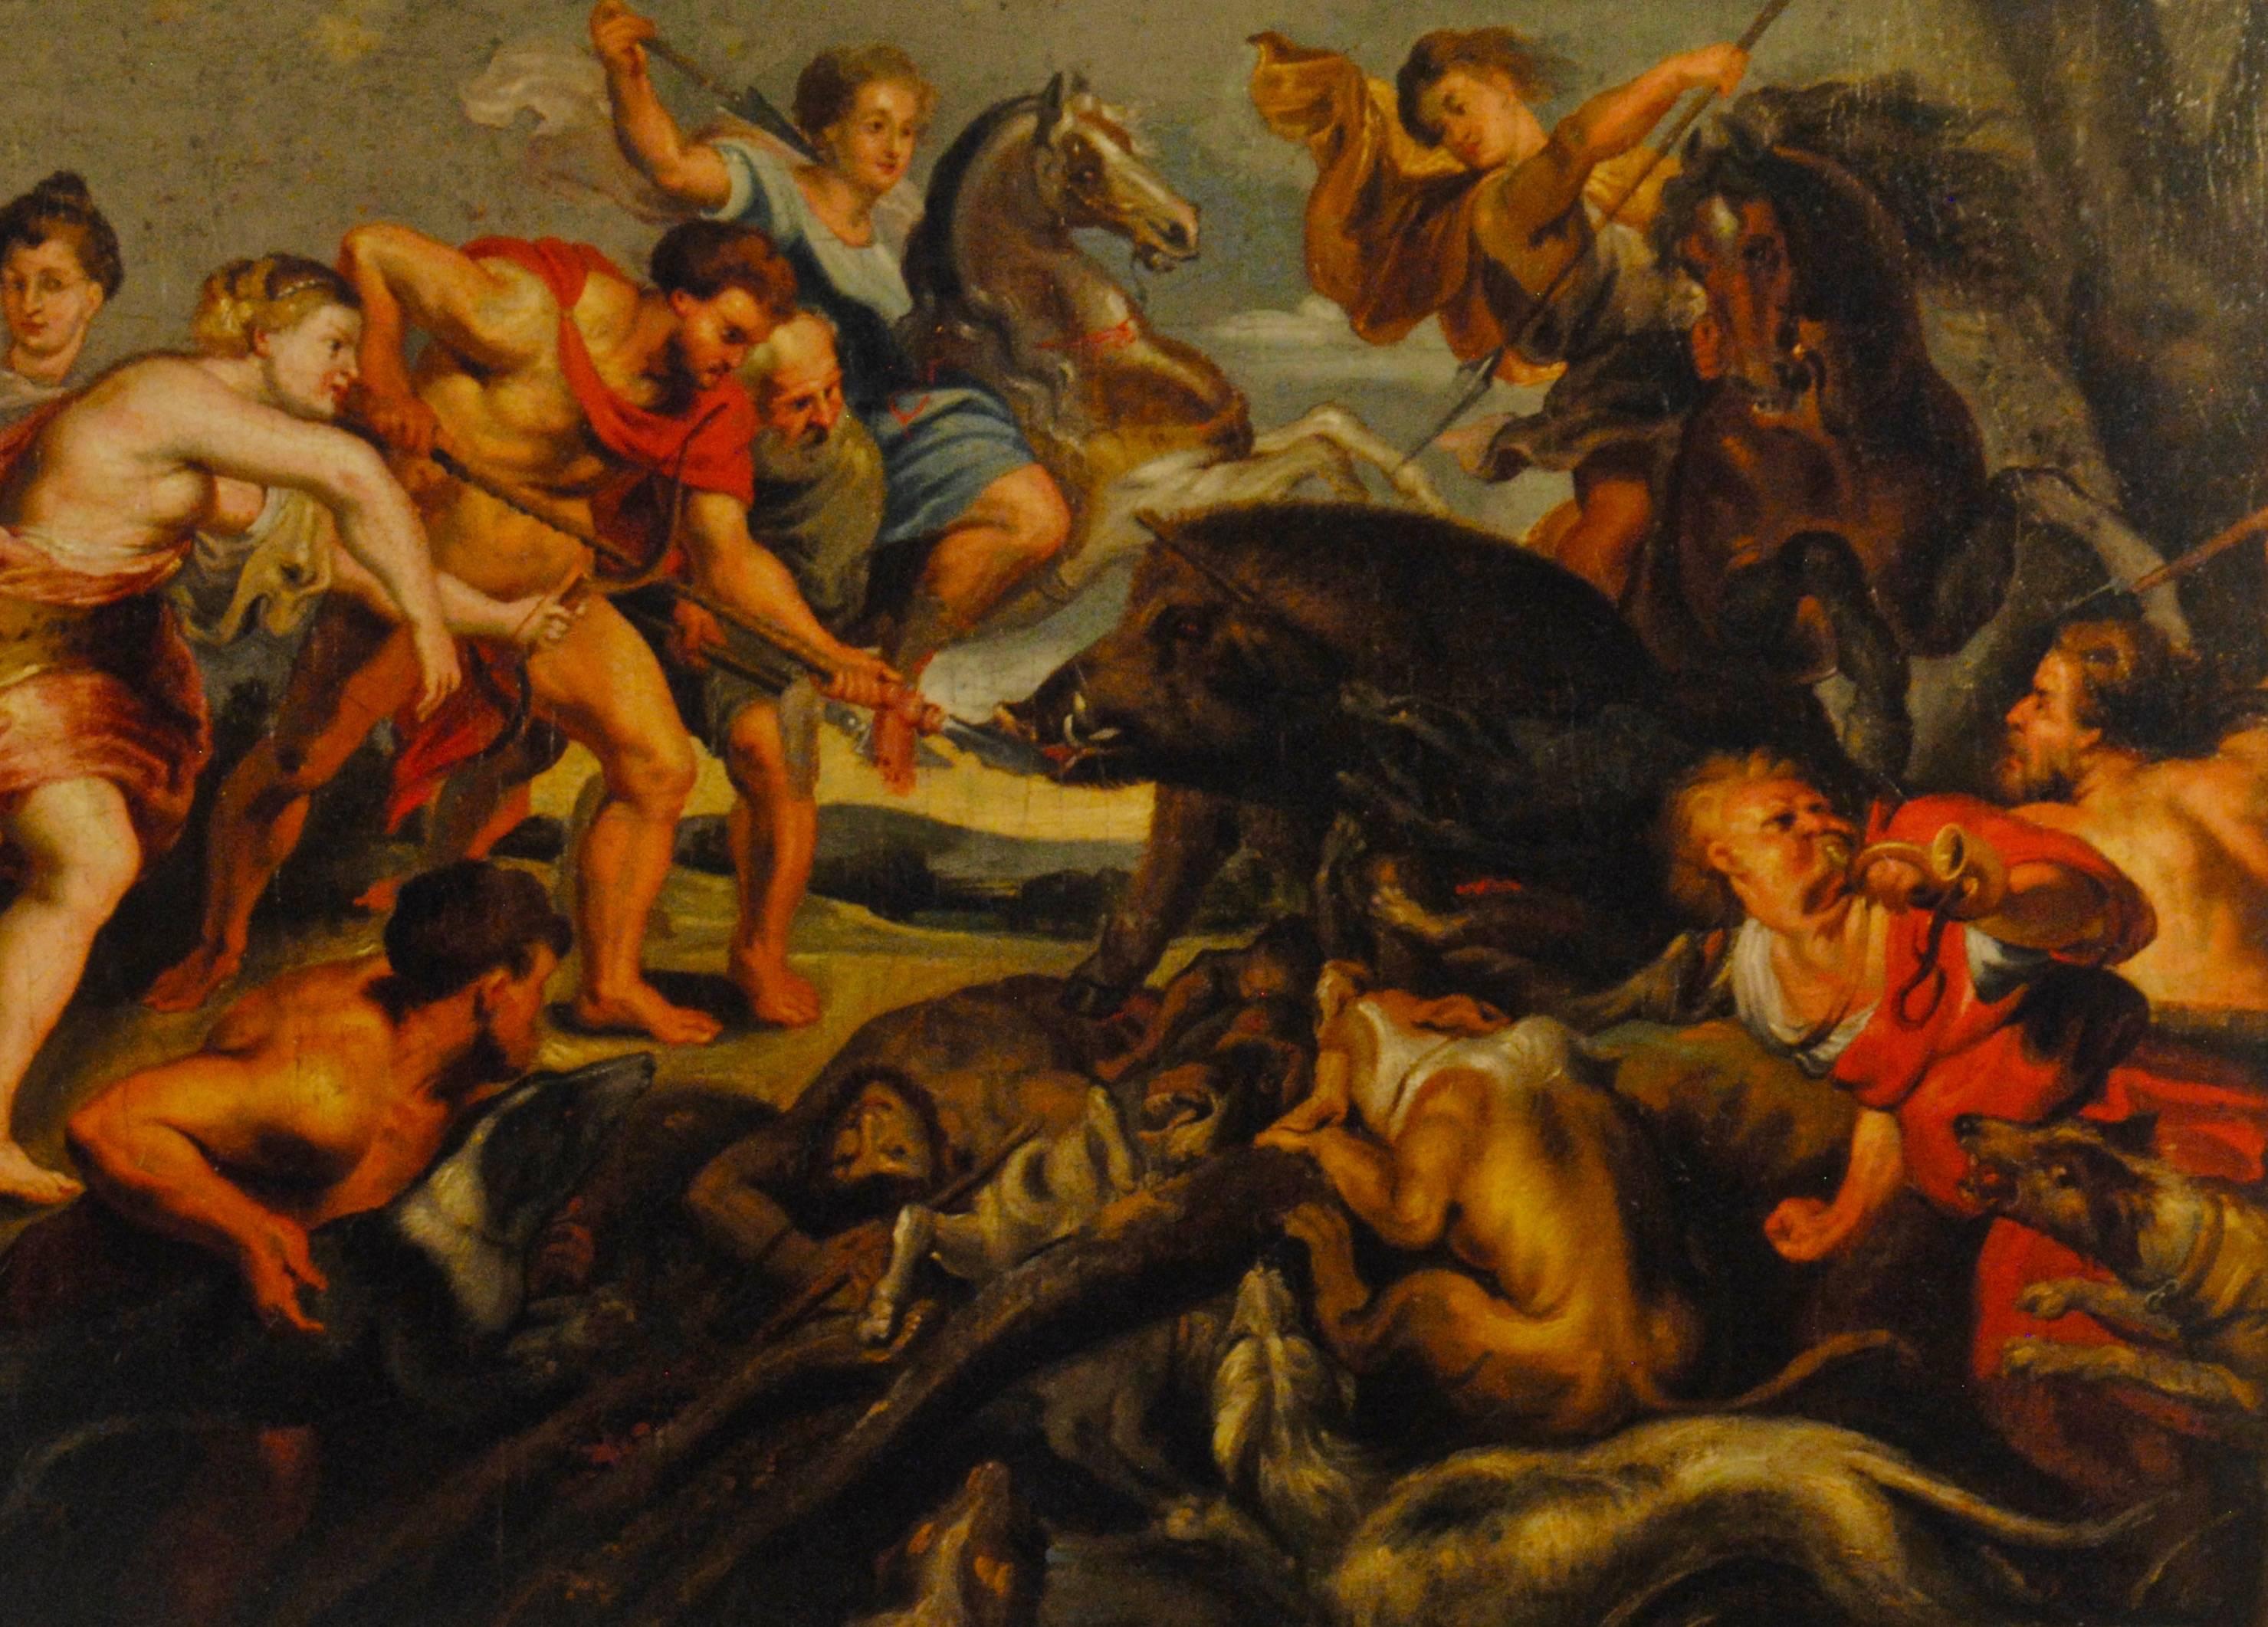 The Hunting of the Calydonian Boar  (The Hunt of Meleagros and Atalanta)

The Hunting of the Calydonian Boar,  suiveur de Peter Paul Rubens, 

Flemish Baroque Old Master oil on original canvas, c. 1630

The Calydonian Boar Hunt was painted by Rubens